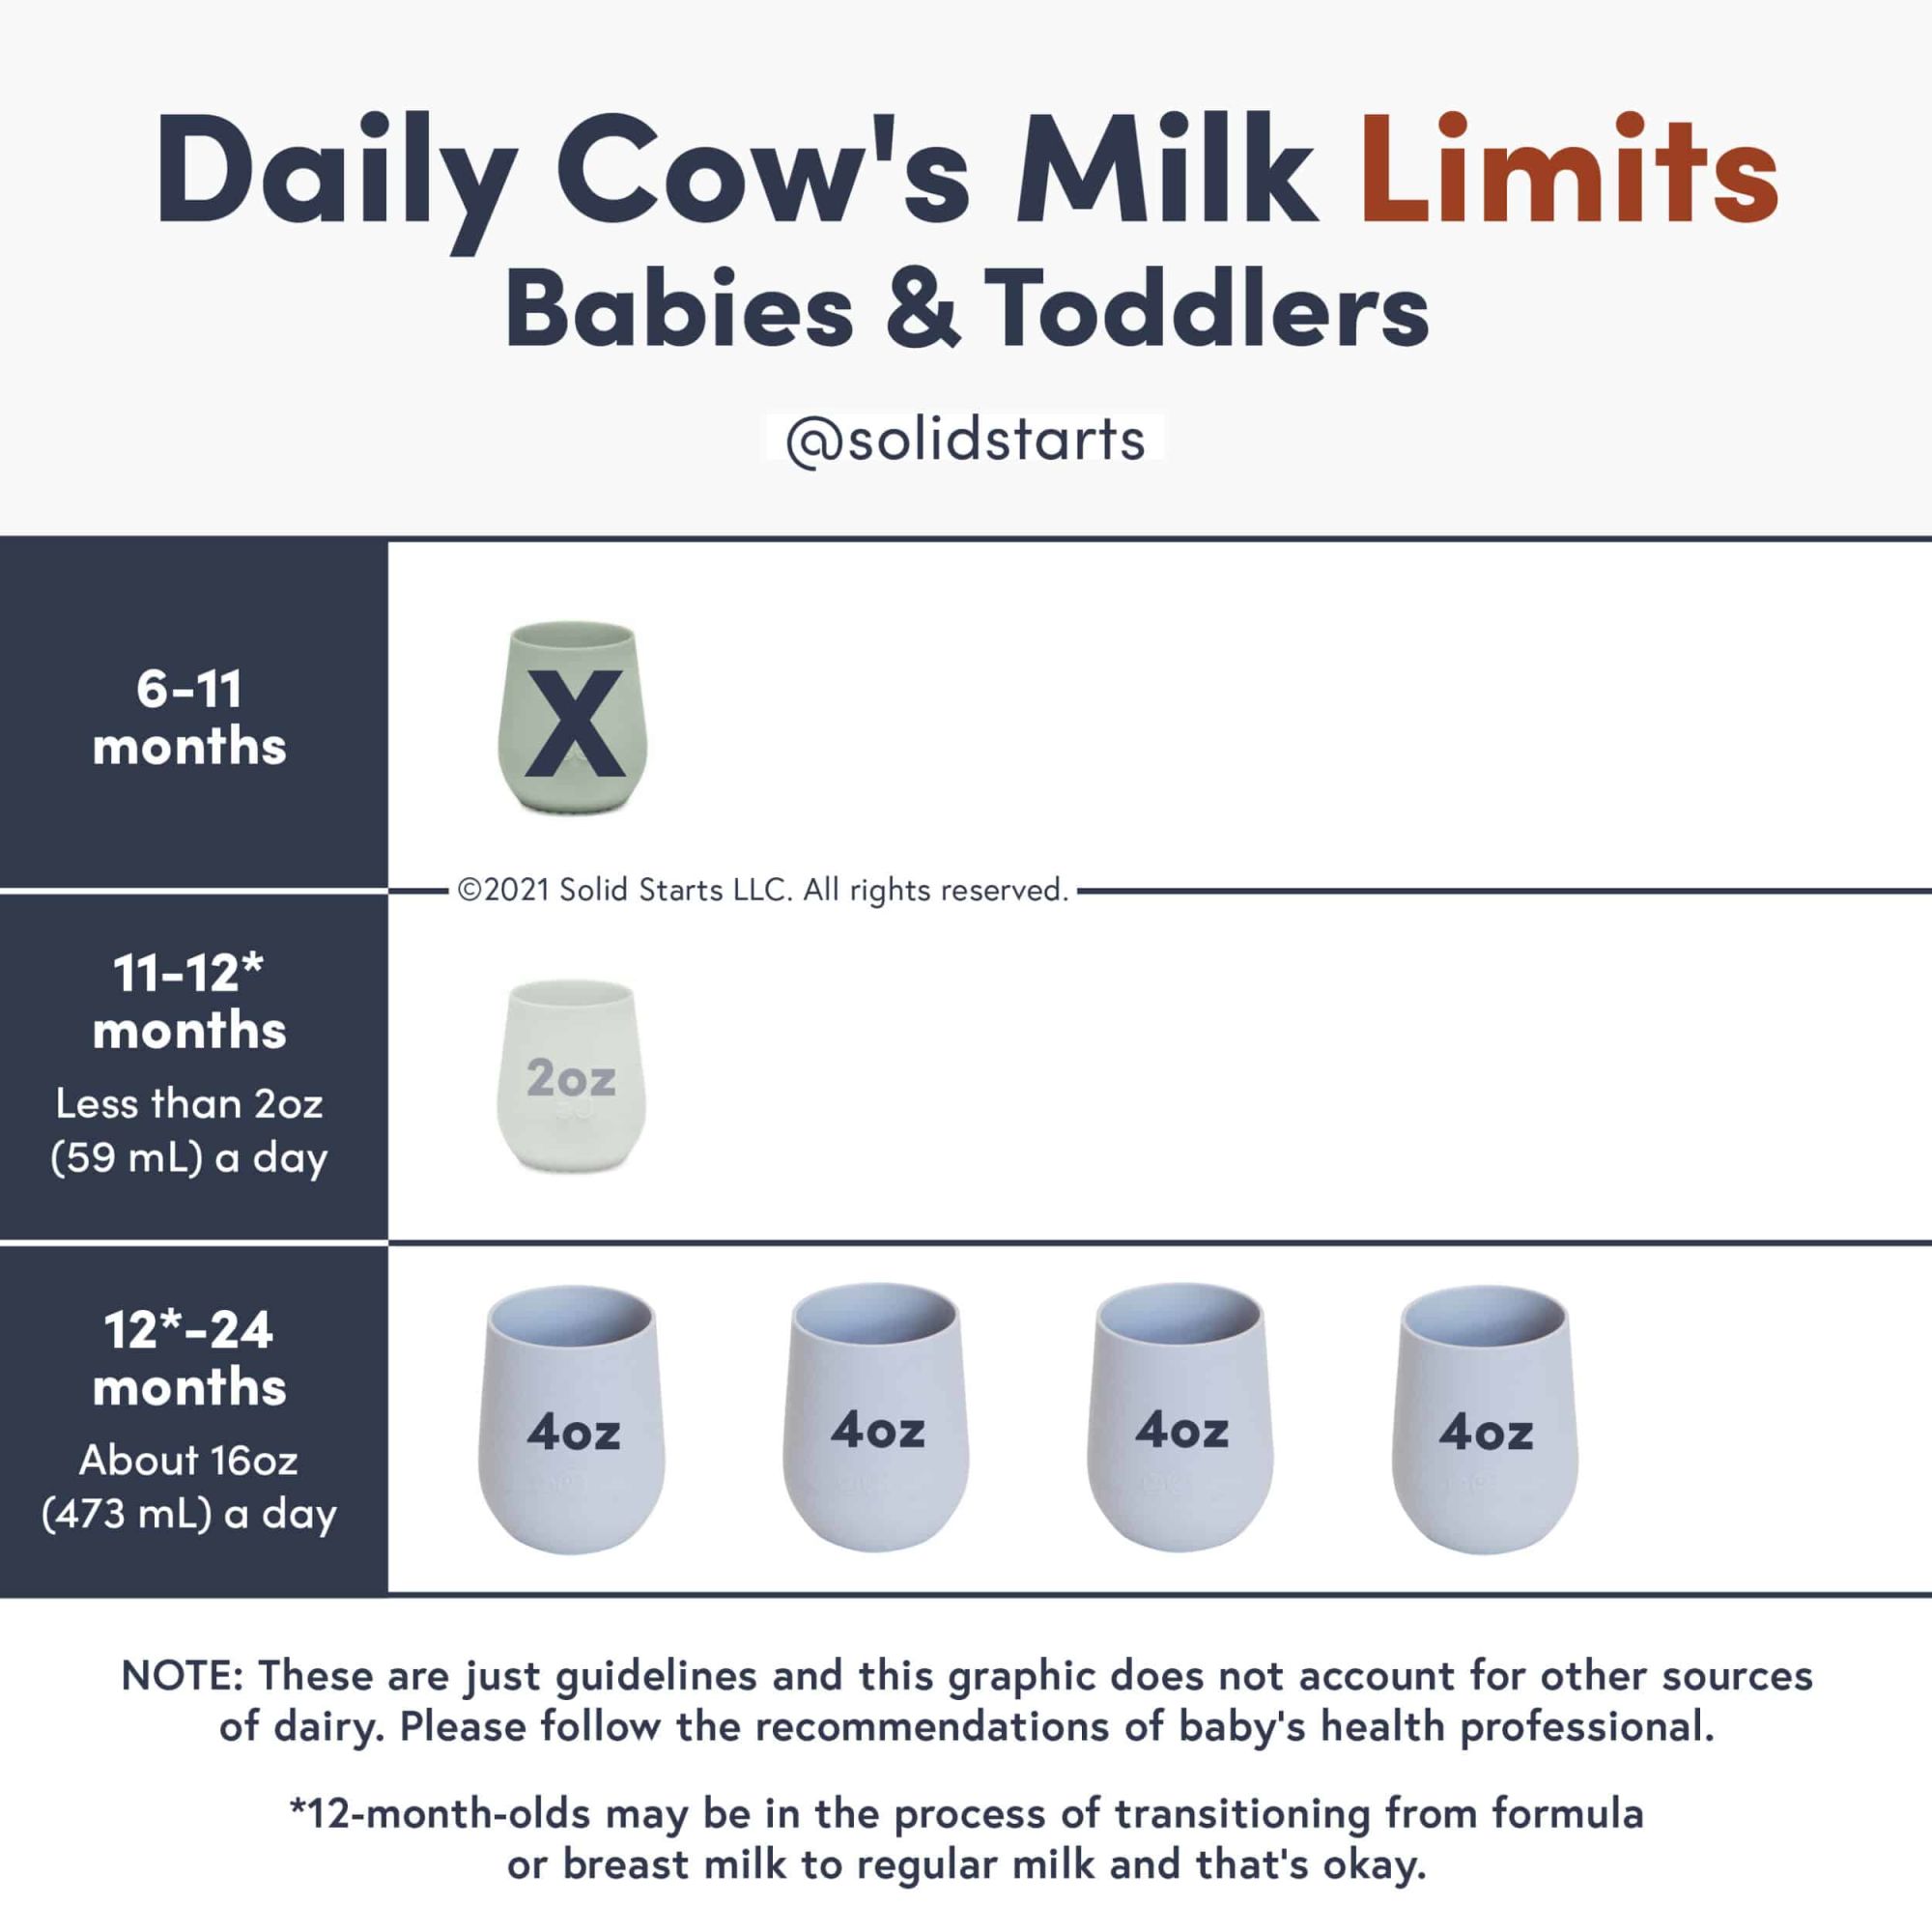 https://images.ctfassets.net/ruek9xr8ihvu/65YQSAKPQpuwsa7AWAfY8Y/be232f9b60183f15b3ac89c7a4785c10/Daily-Cows-Milk-Limits-for-Babies-and-Toddlers--scaled.jpg?w=2000&q=80